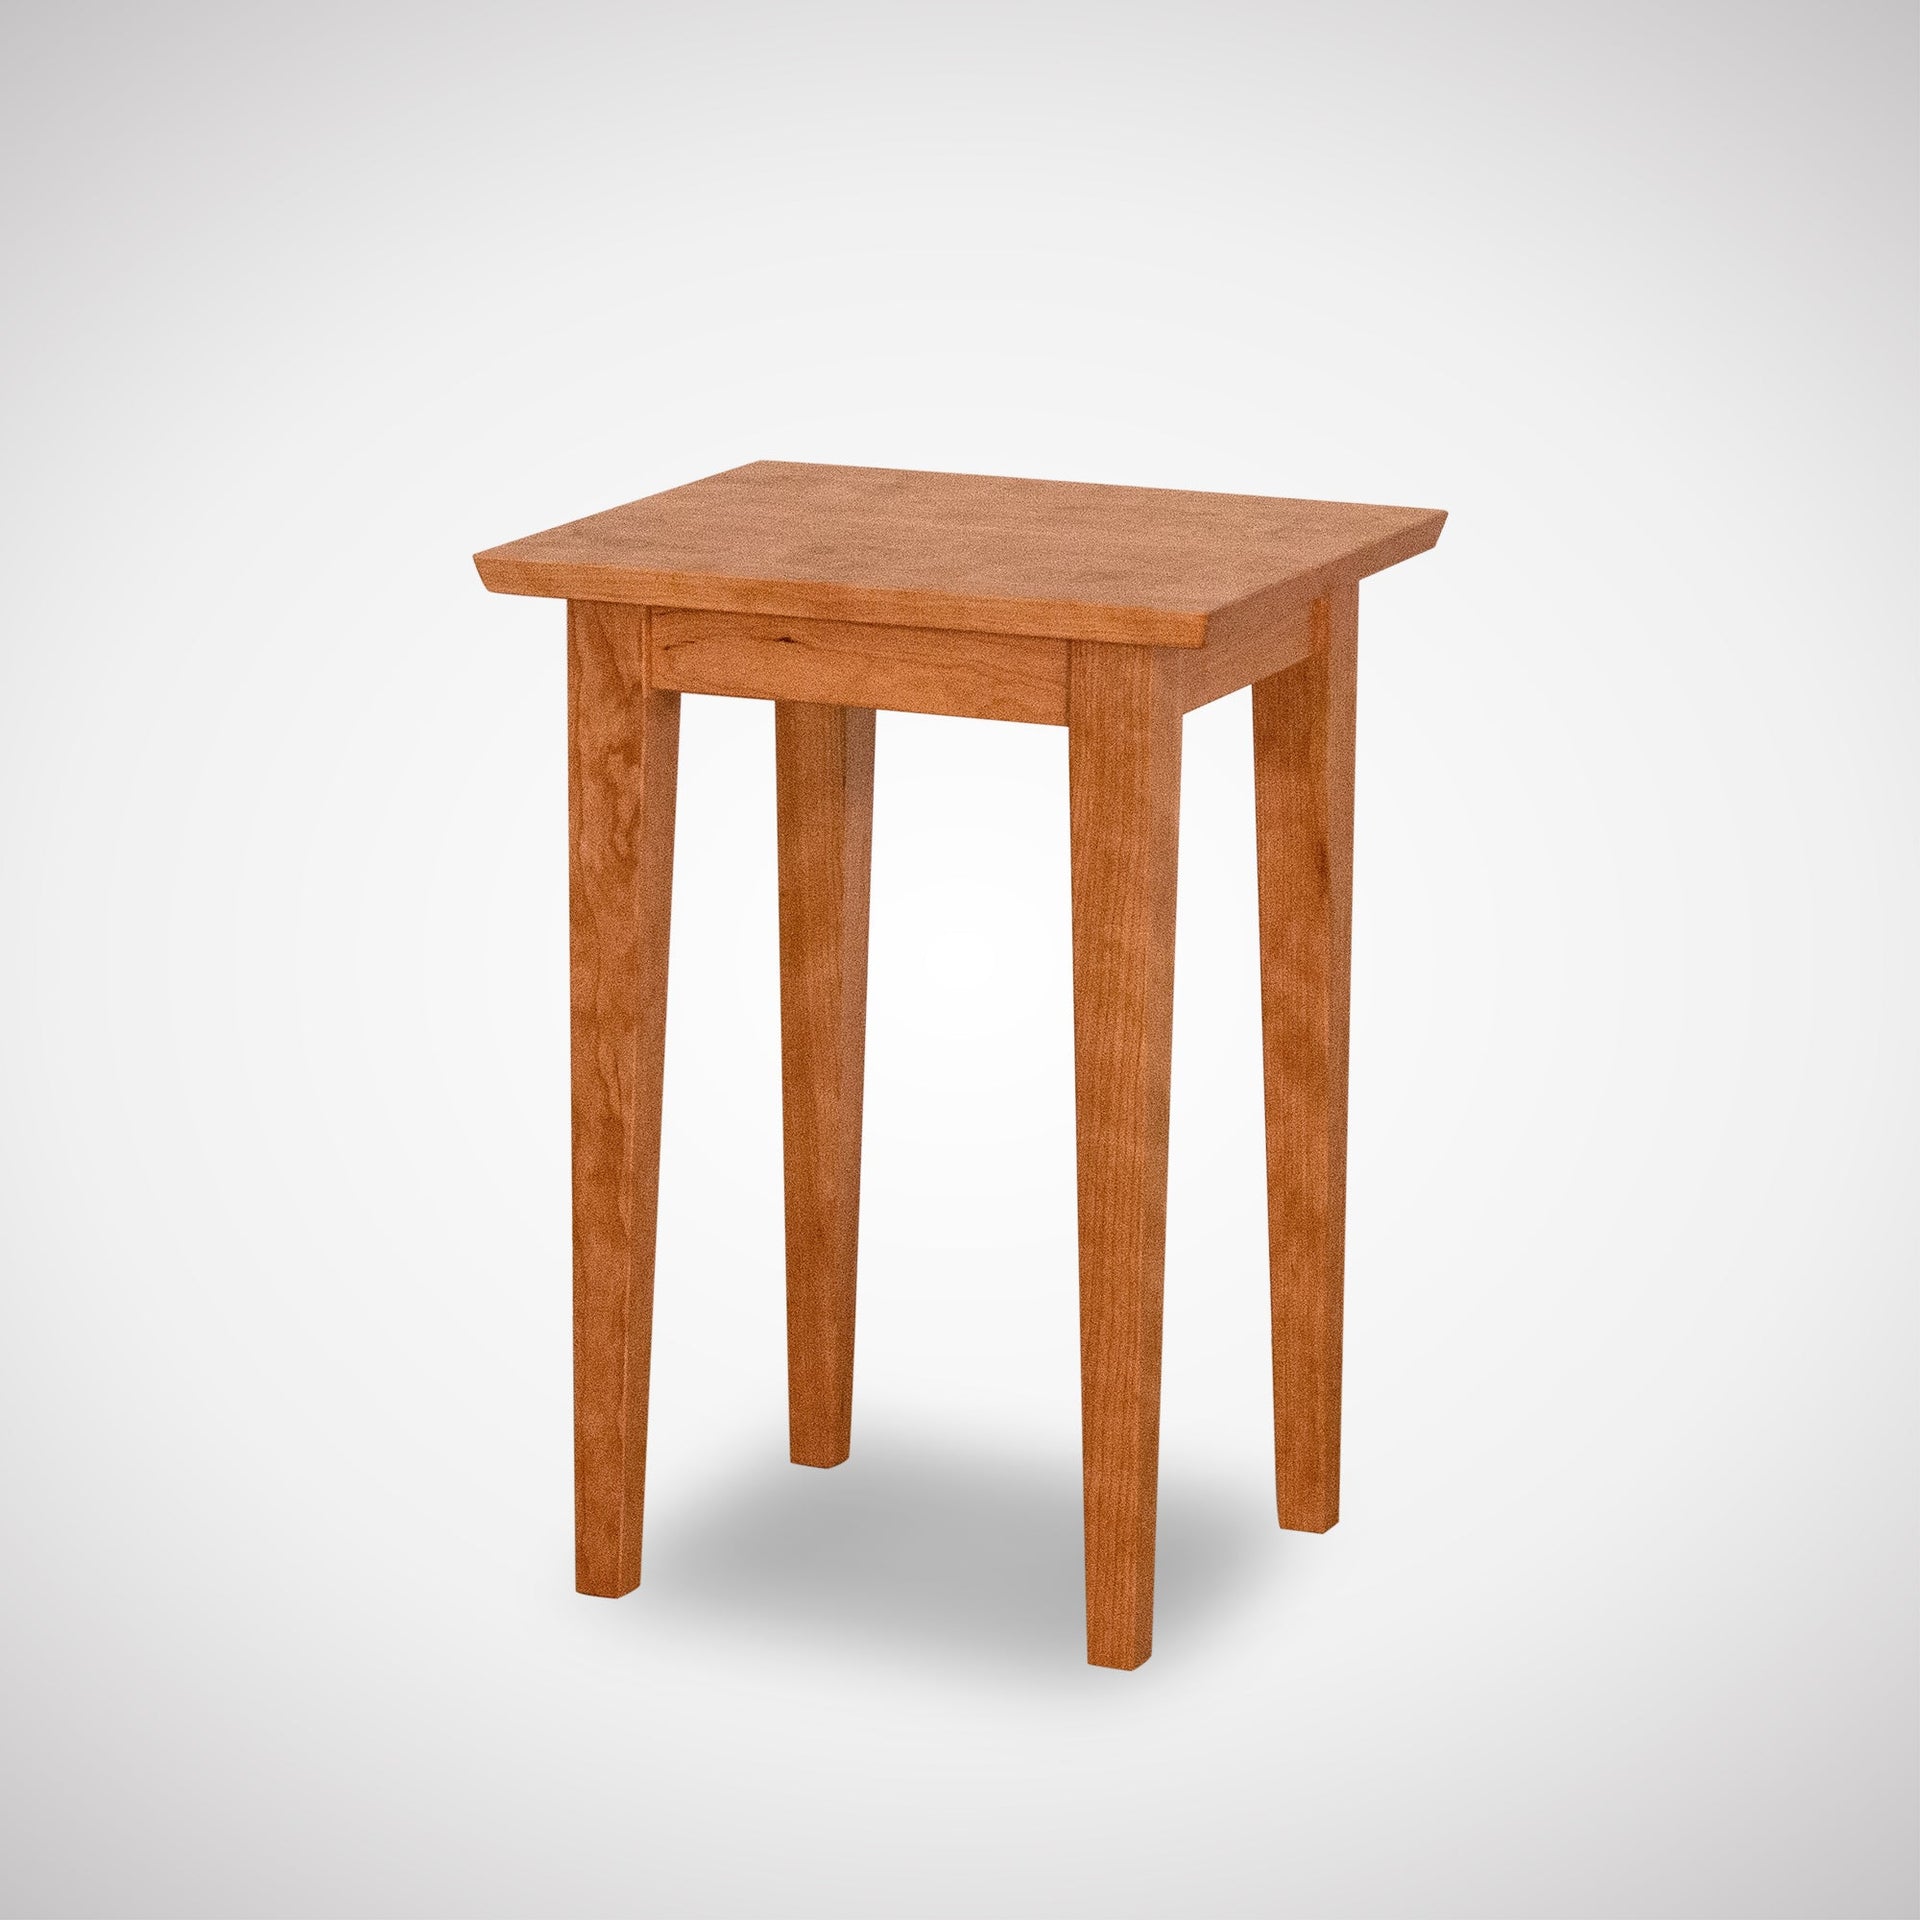 Shaker side table crafted from solid wood